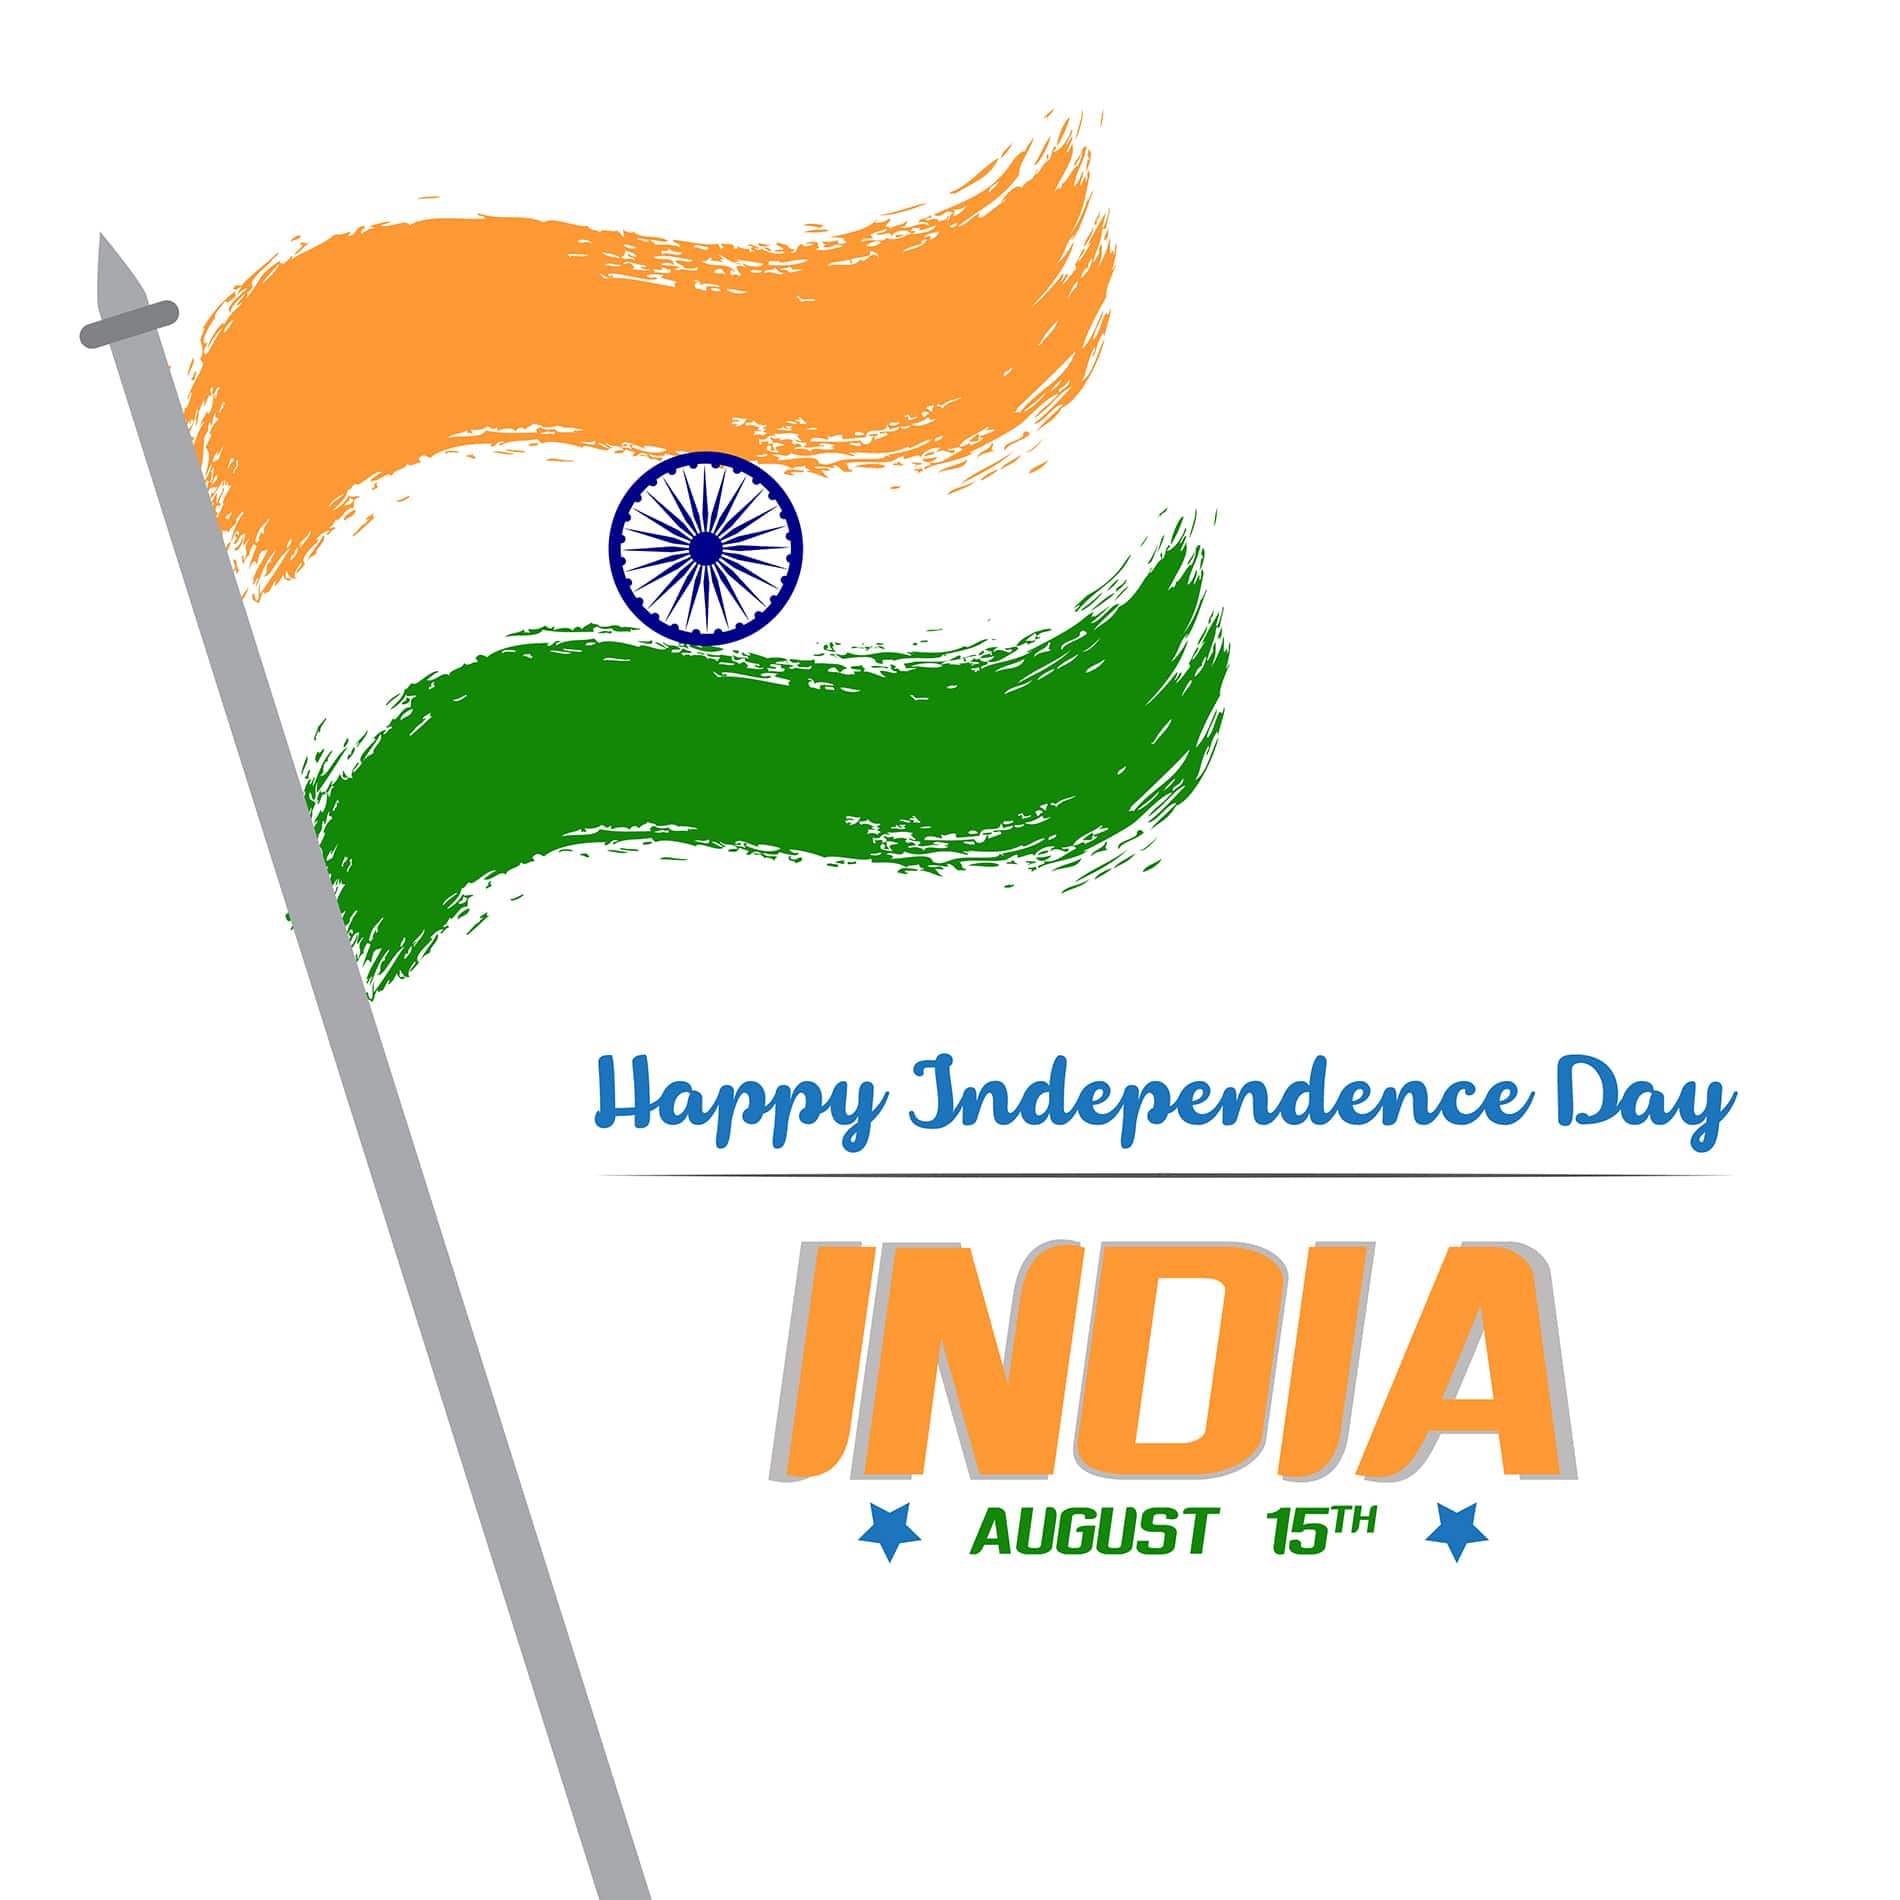 Happy Independence Day India free vector graphic for social media posts